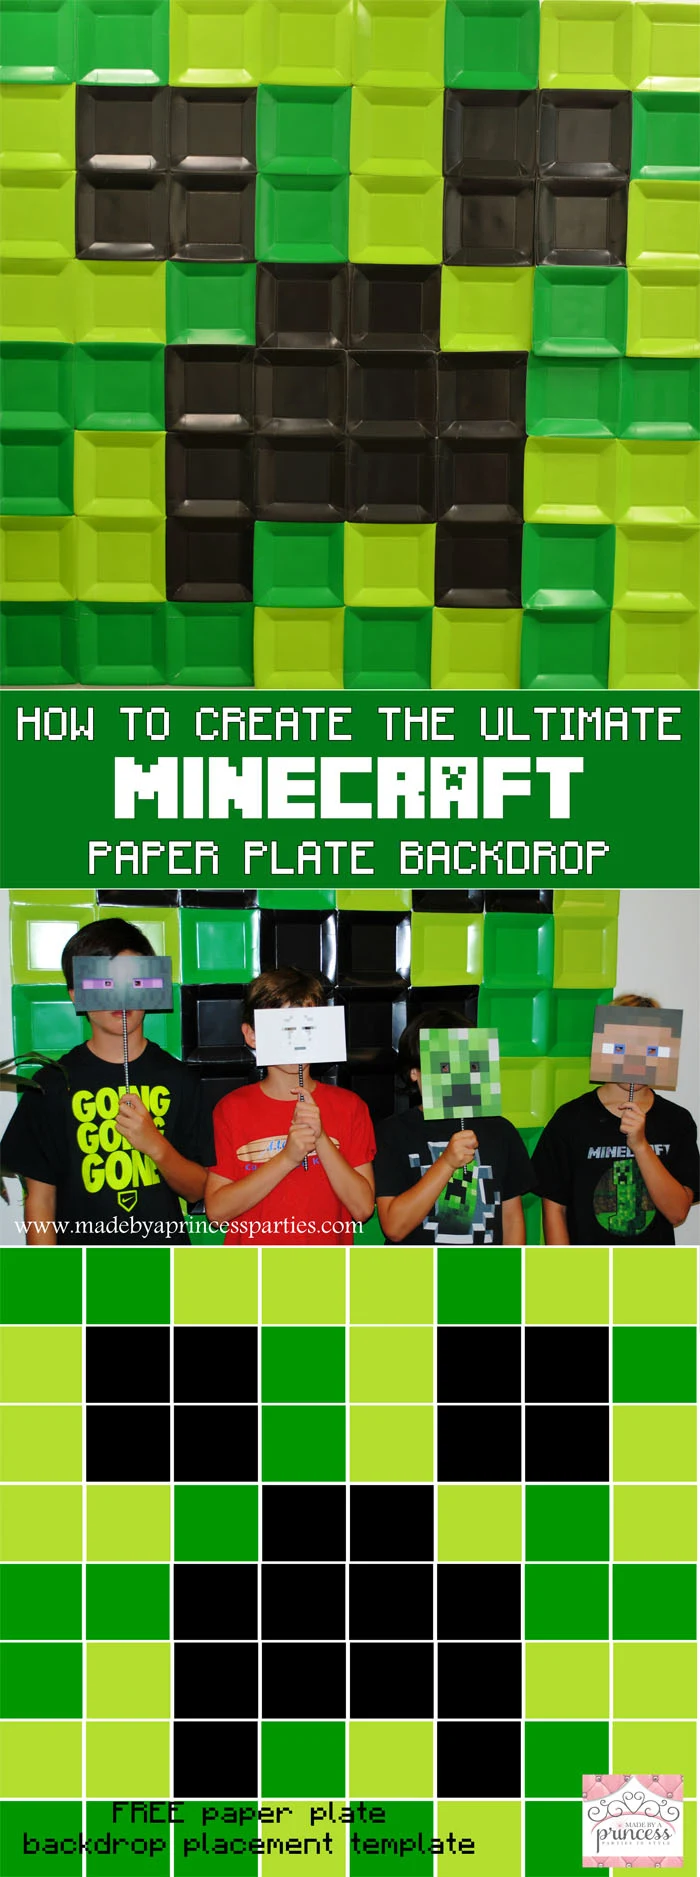 how to create the ultimate minecraft paper plate backdrop pin it